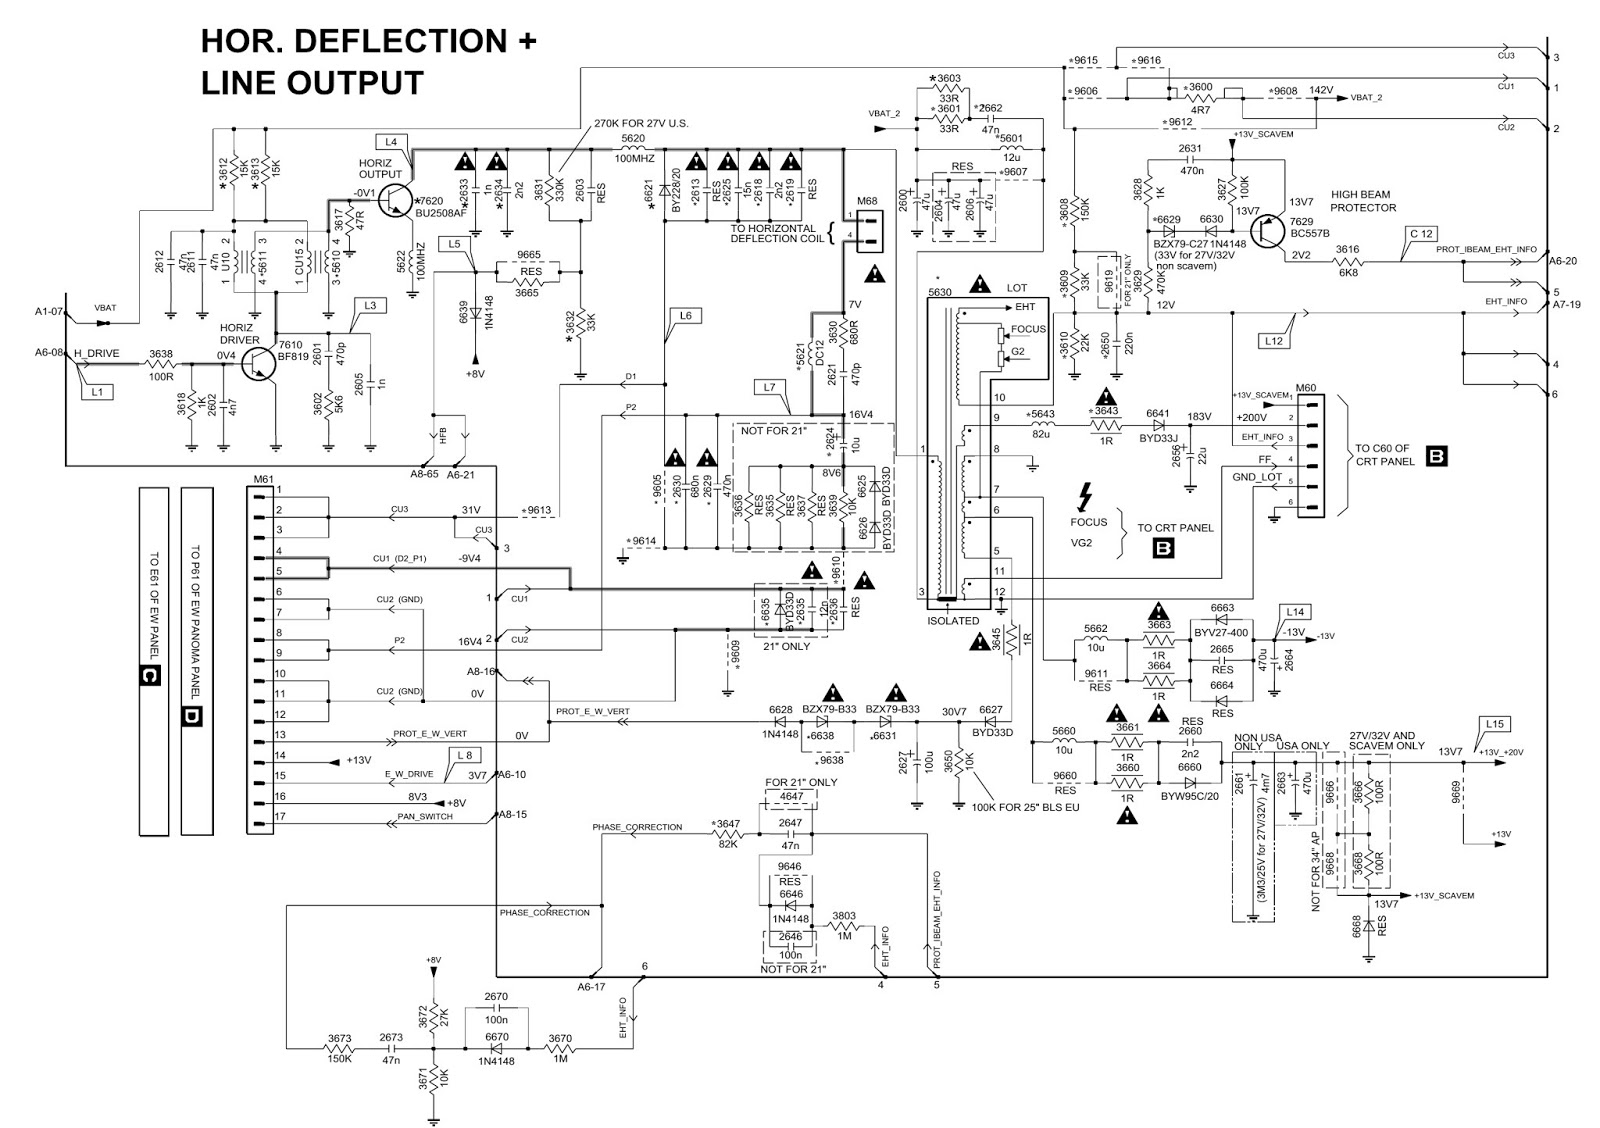 Electro help: PHILIPS - A8.0E - CHASSIS CTV - SCHEMATIC [CIRCUIT] DIAGRAMS